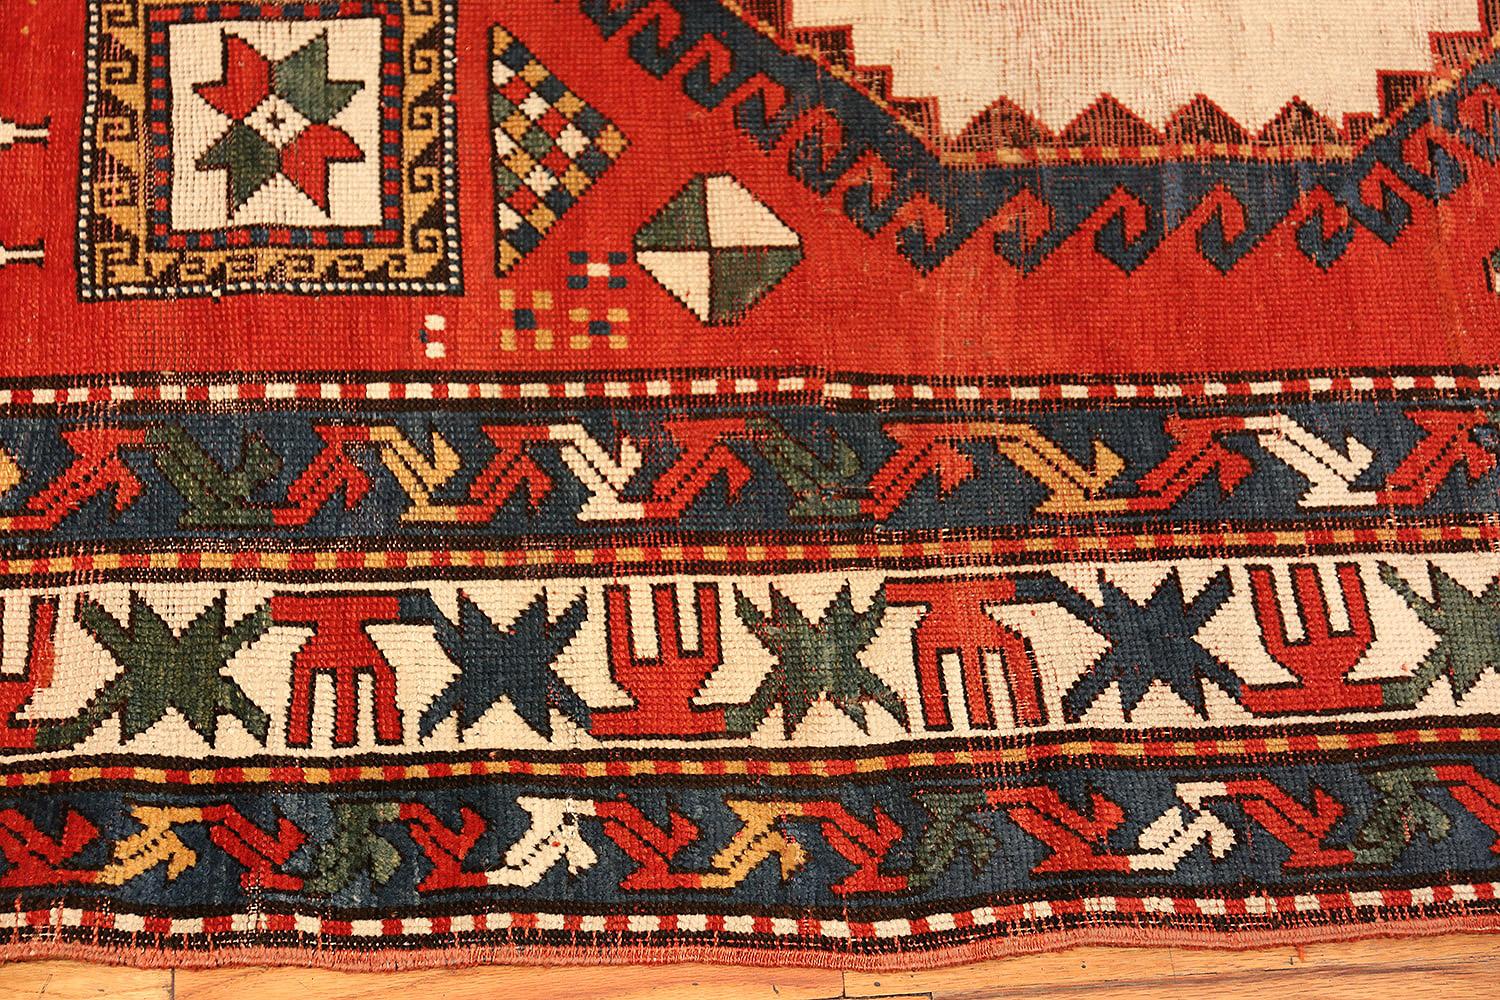 Gorgeous Tribal antique Caucasian Kazak rug, country of origin / rug type: Caucasian rugs, circa 1900. Size: 6 ft 7 in x 9 ft 2 in (2.01 m x 2.79 m)

 Kazak rugs are both rustic and irresistible. This brightly colored piece features tribal symbols